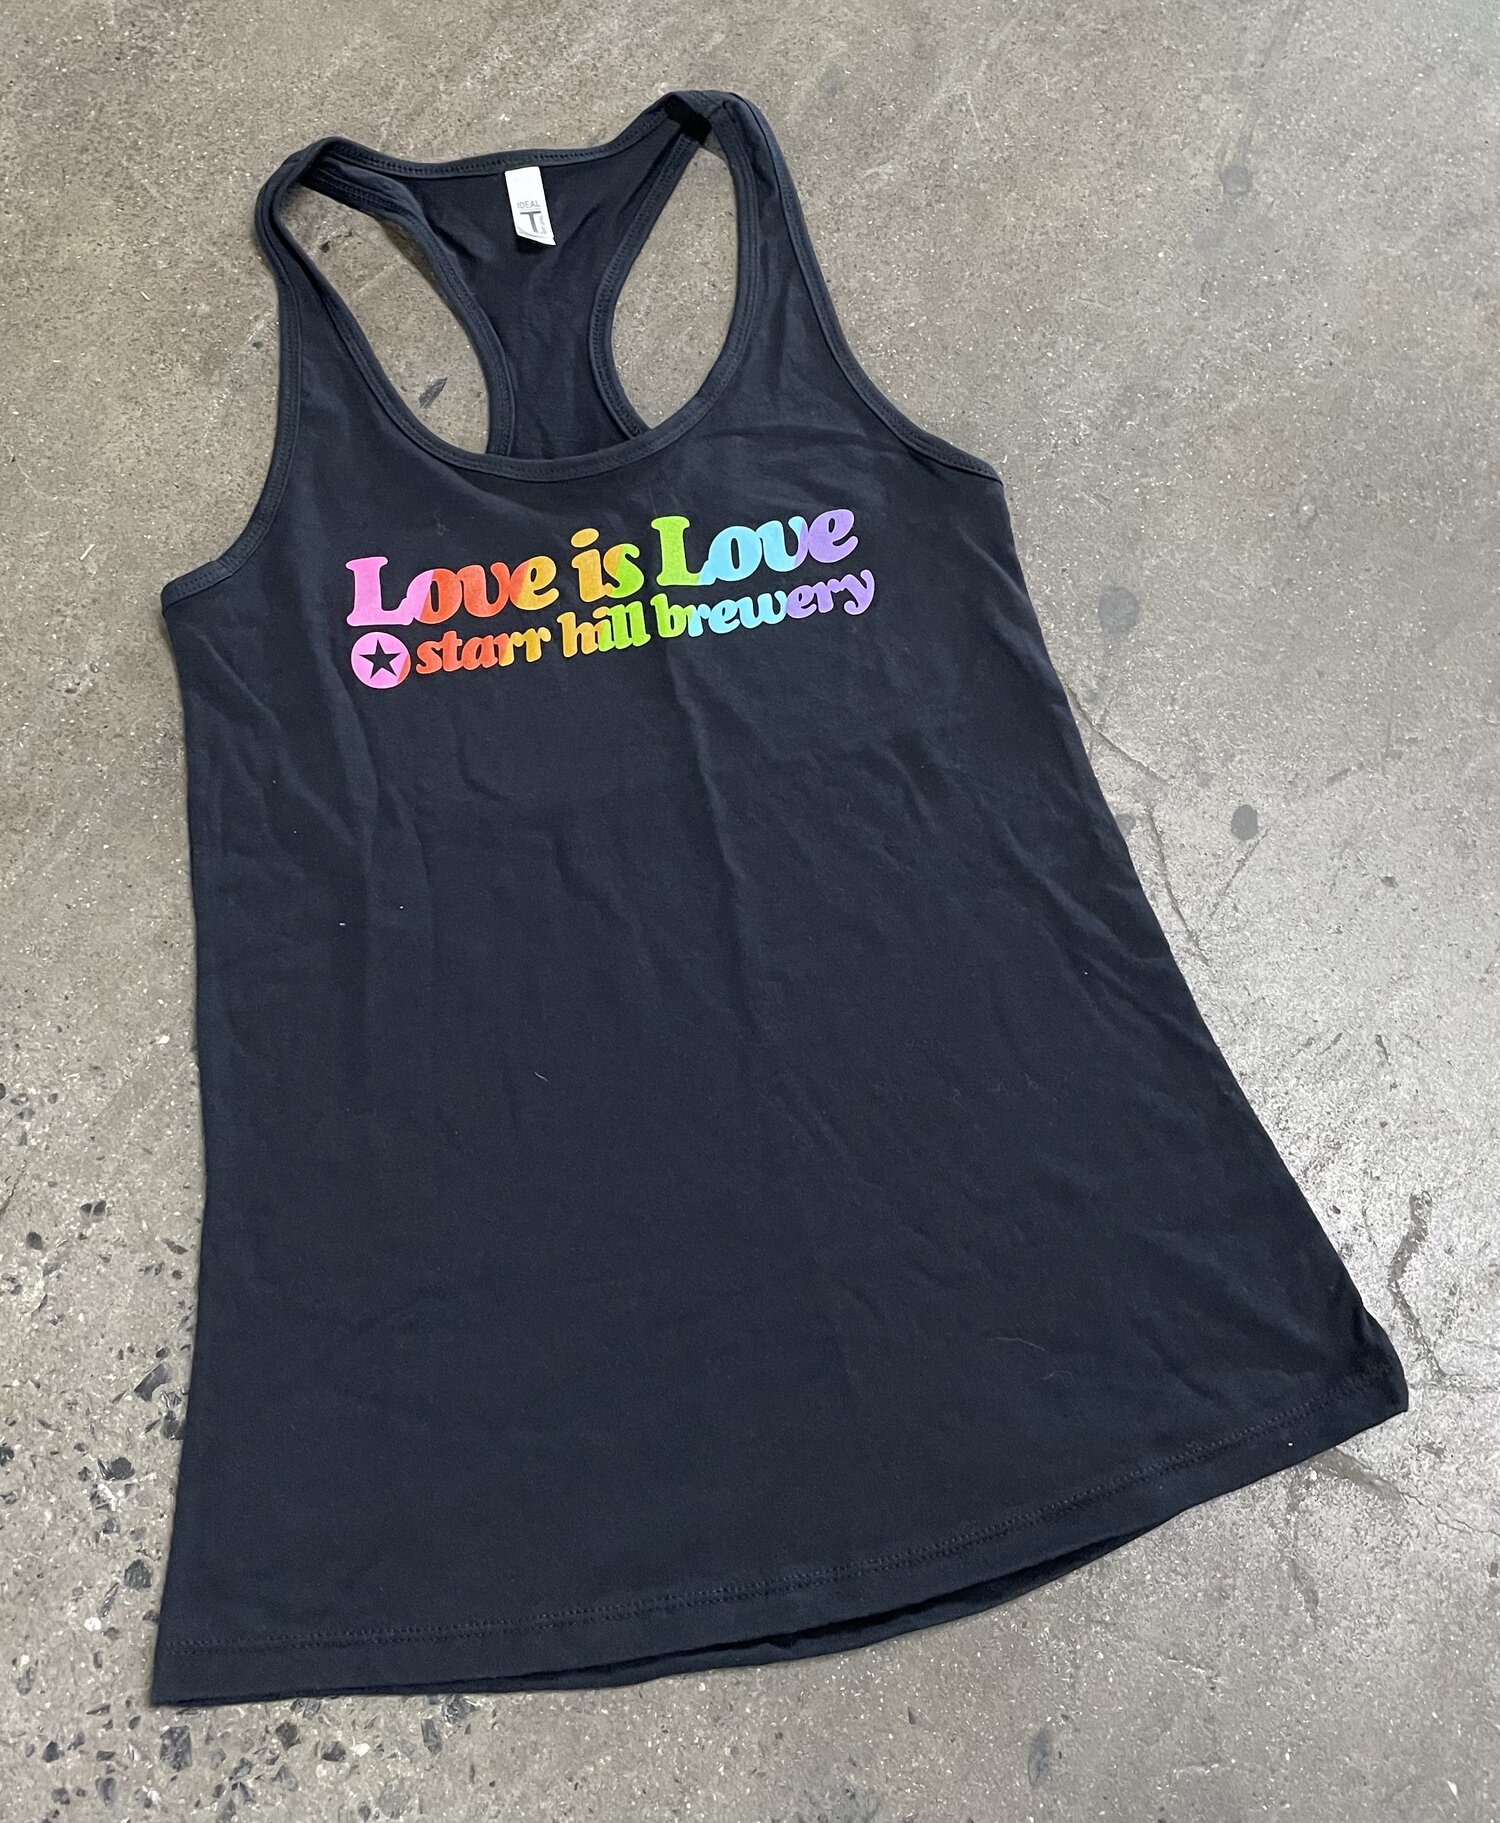 Dusør Mængde penge Tradition Love Is Love Tank Top — Starr Hill Brewery